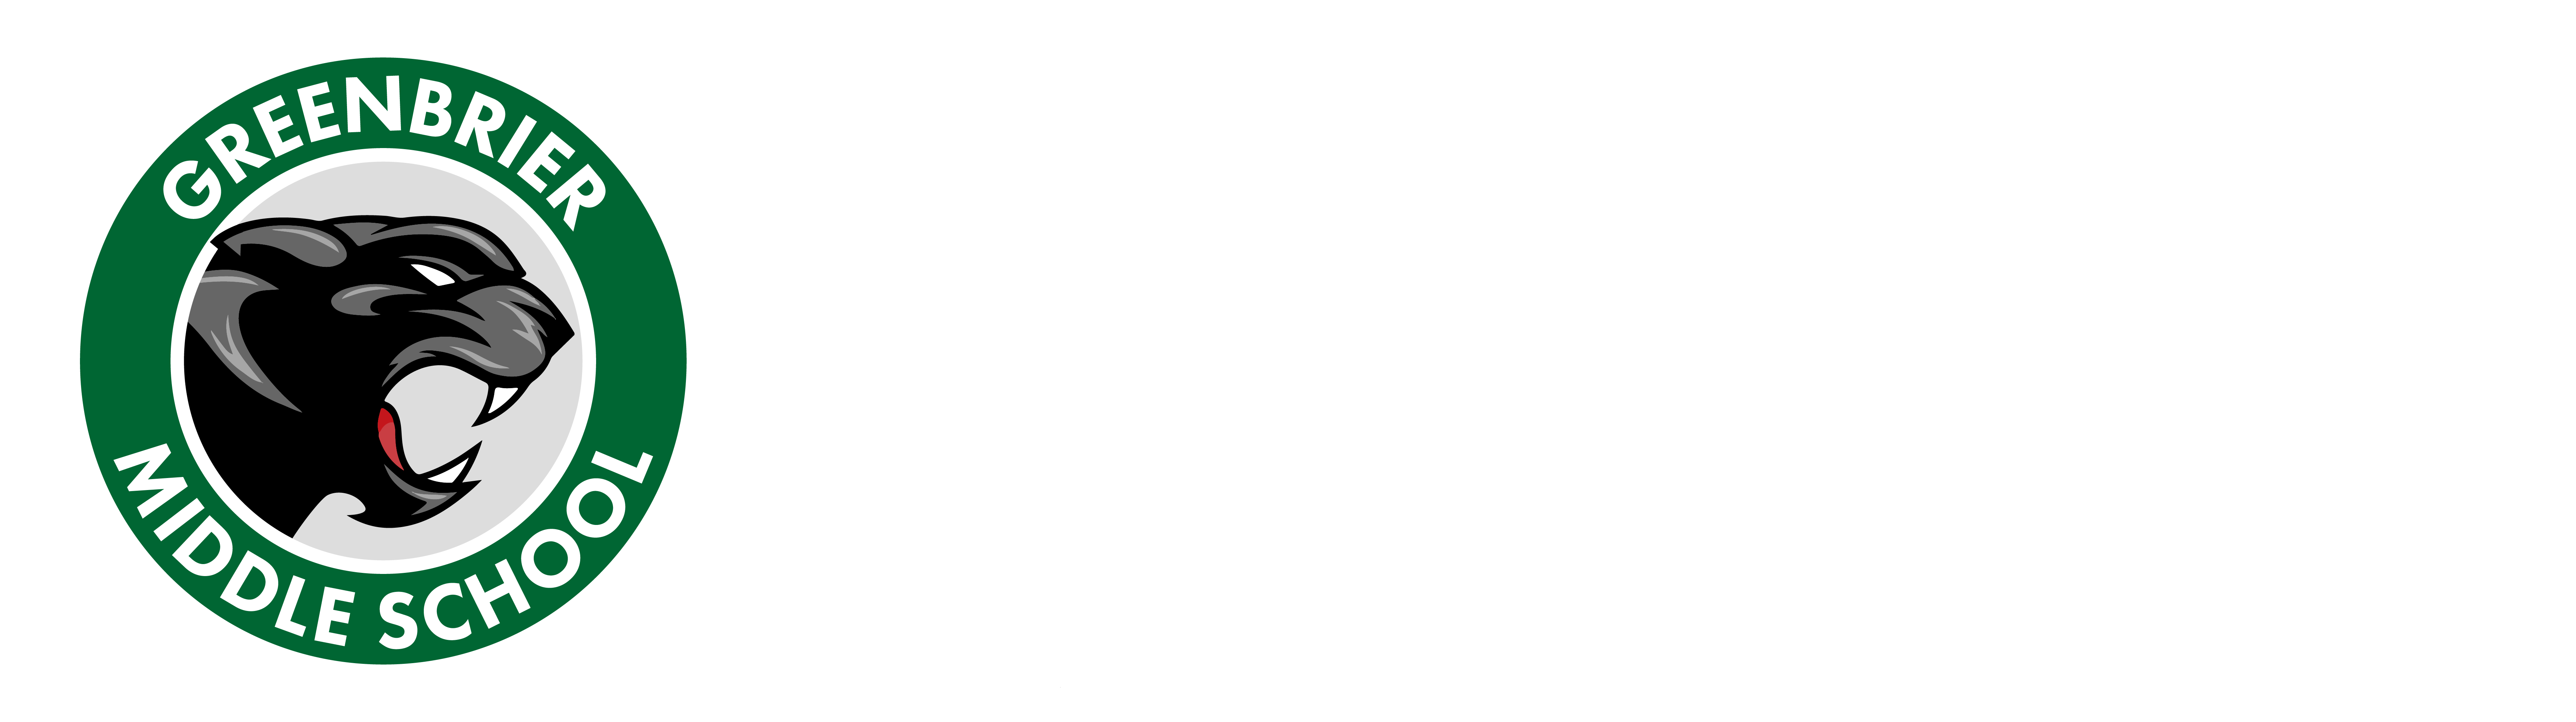 Athletics | Greenbrier Middle